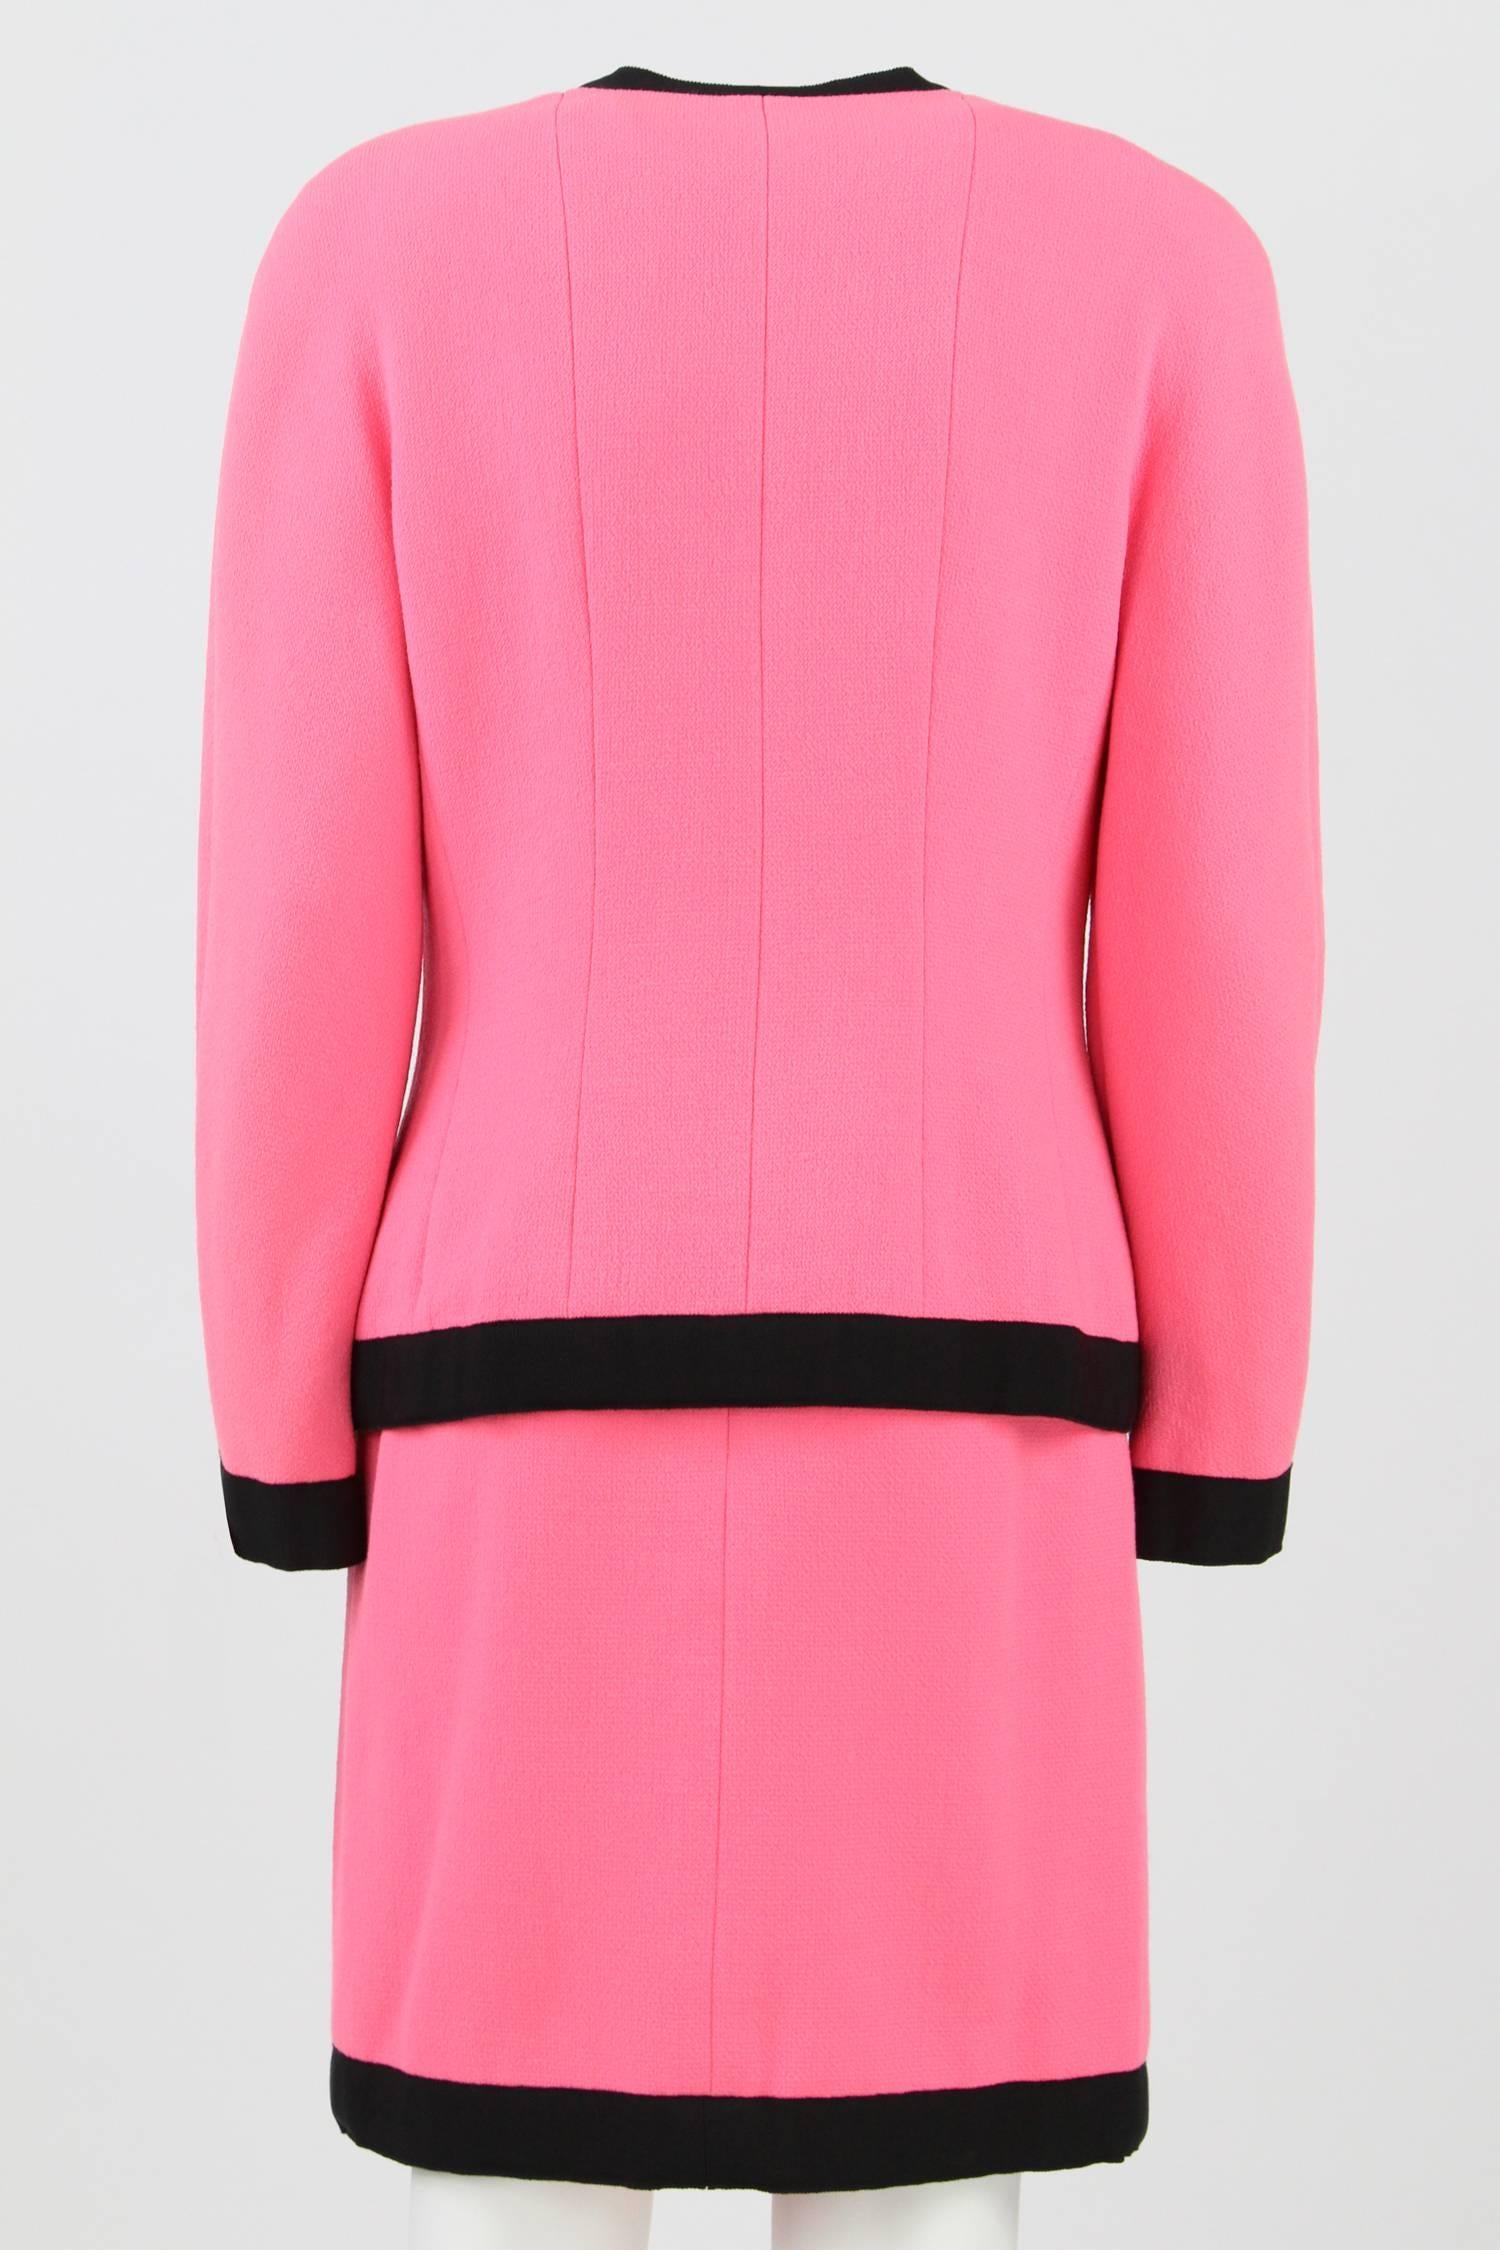 Beautiful Chanel pink wool skirt suit, featuring a bow, logo buttons and two front pockets. Fully lined in silk.
It is elegant worn as a suit, but why not trying the jacket on a pair of jean?

The item is in very good conditions, but the jacket